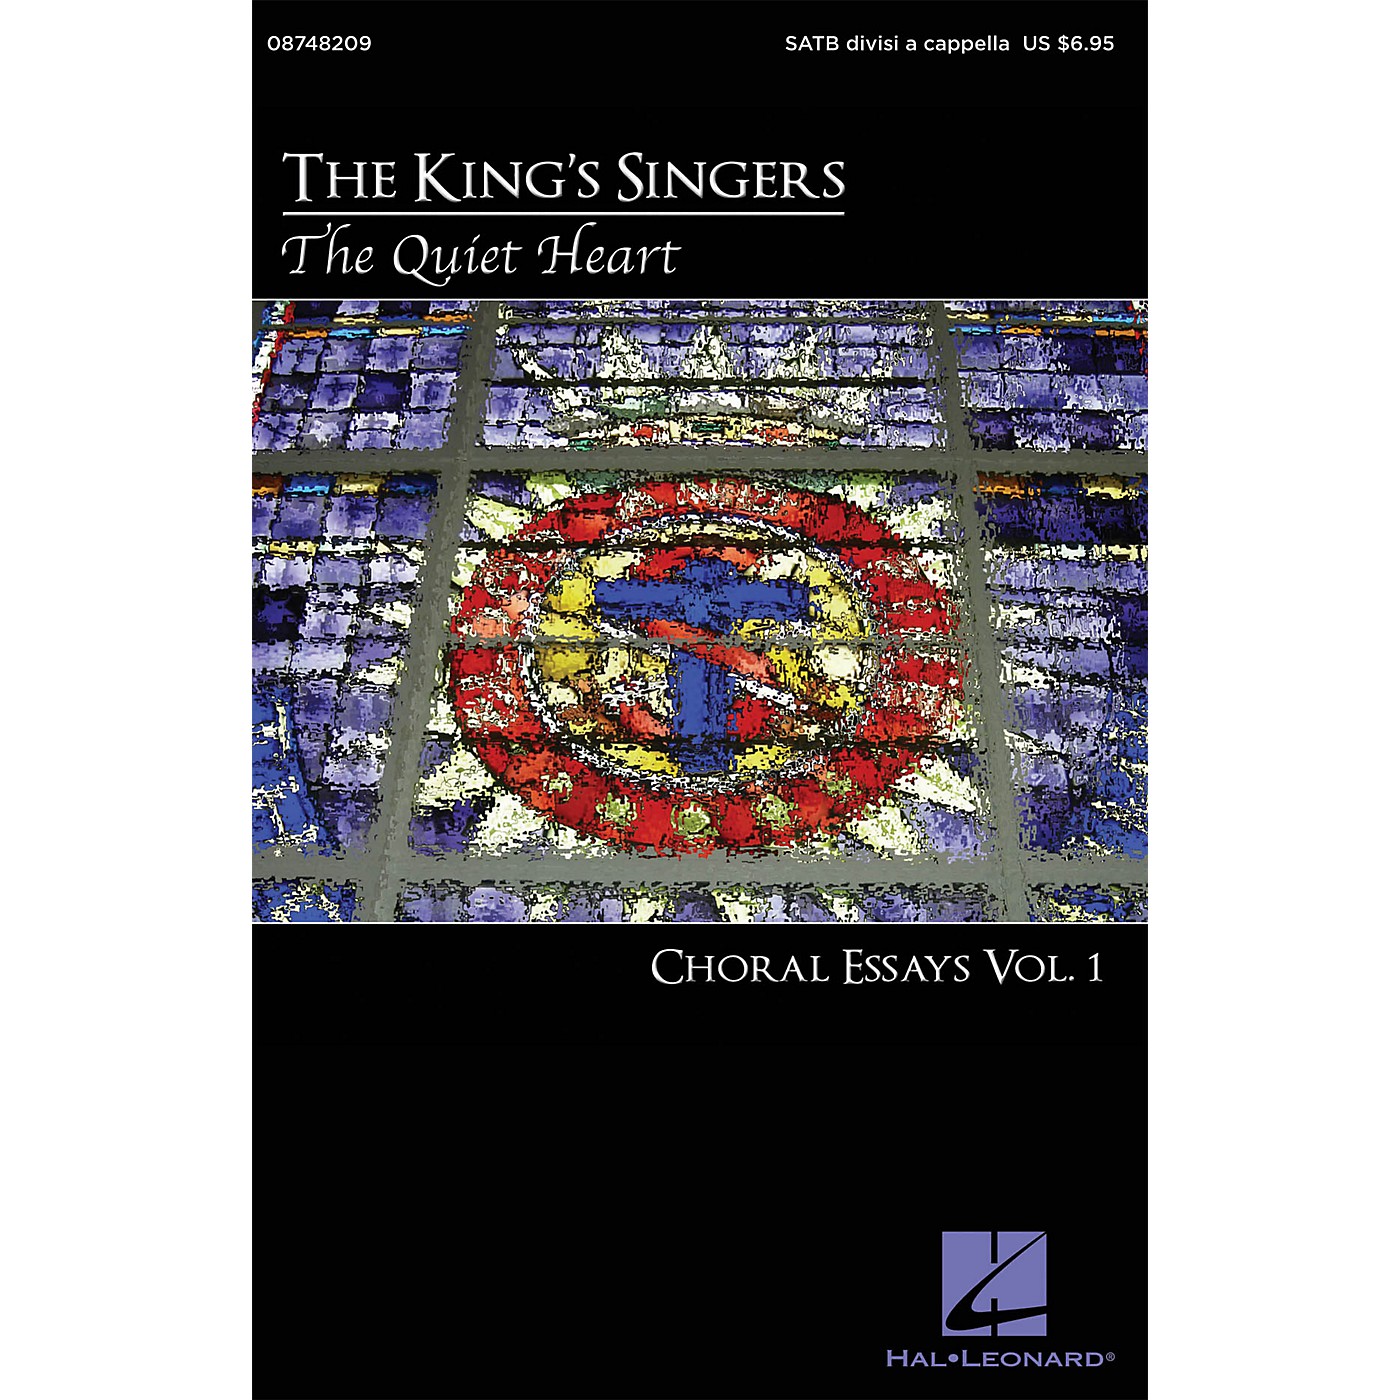 Hal Leonard The Quiet Heart: Choral Essays Volume 1 SATB DV A Cappella by The King's Singers arranged by Philip Lawson thumbnail